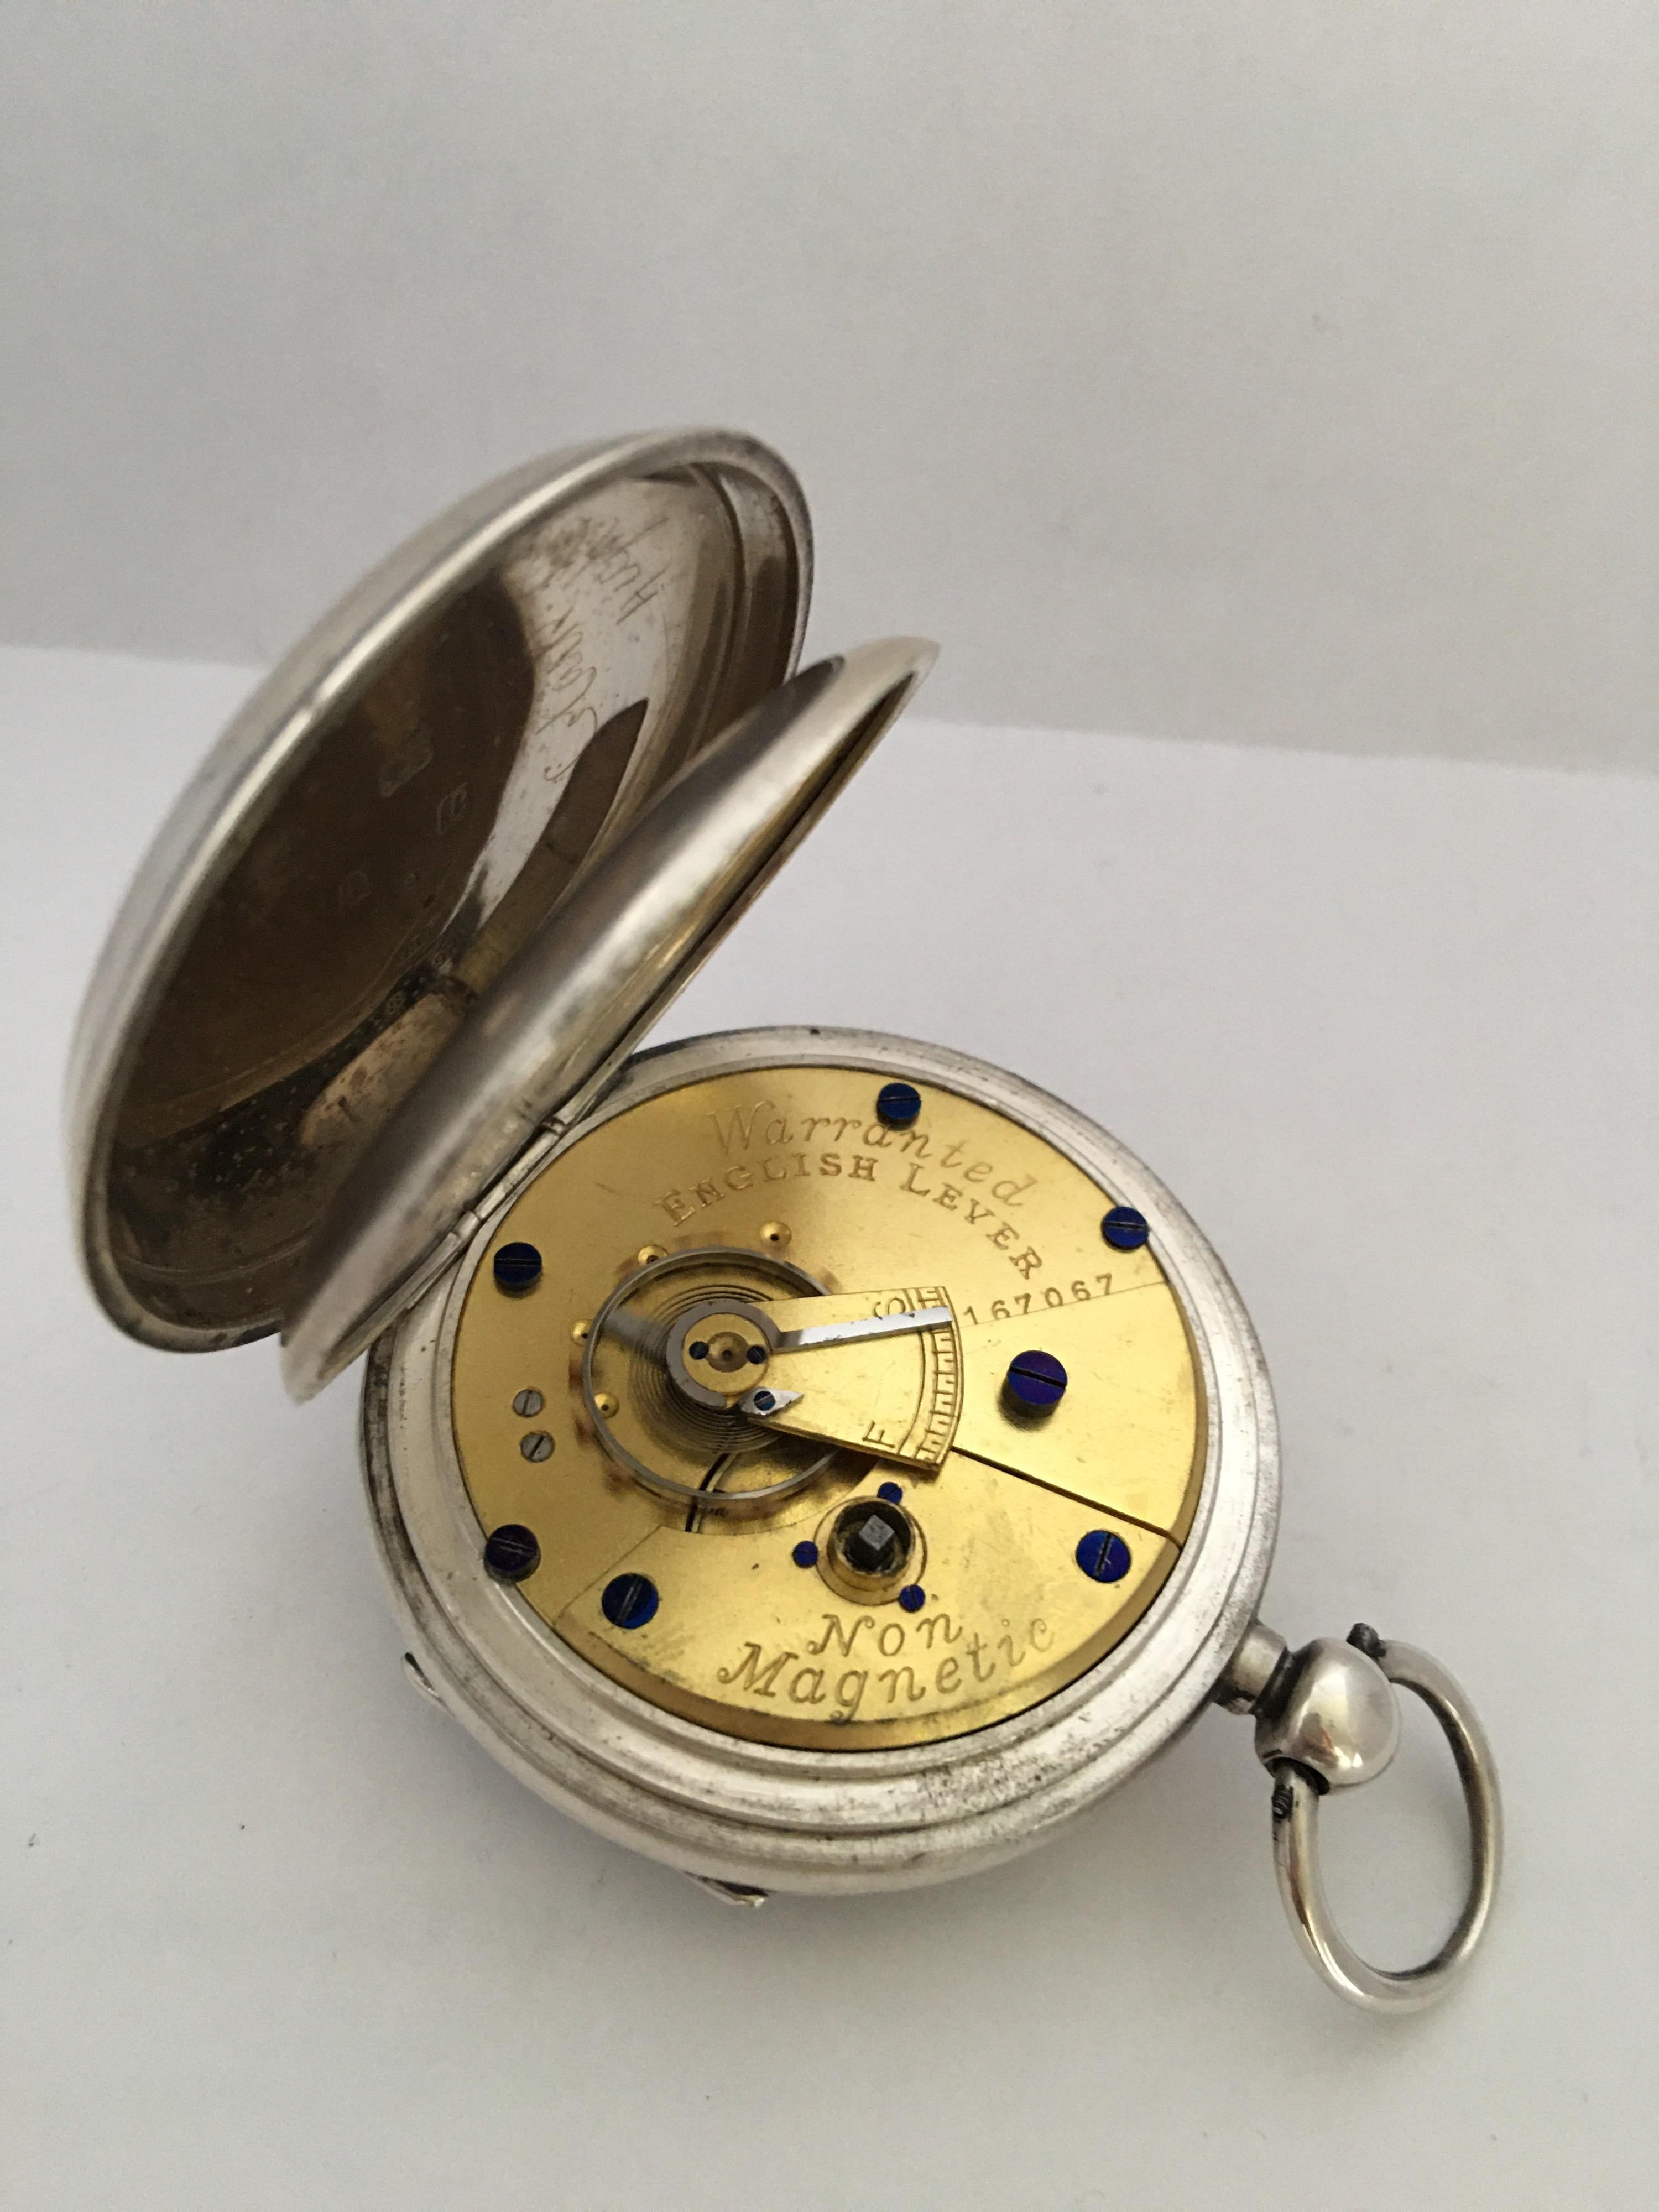 Antique Silver Engine Turned Case English Lever Pocket Watch 1